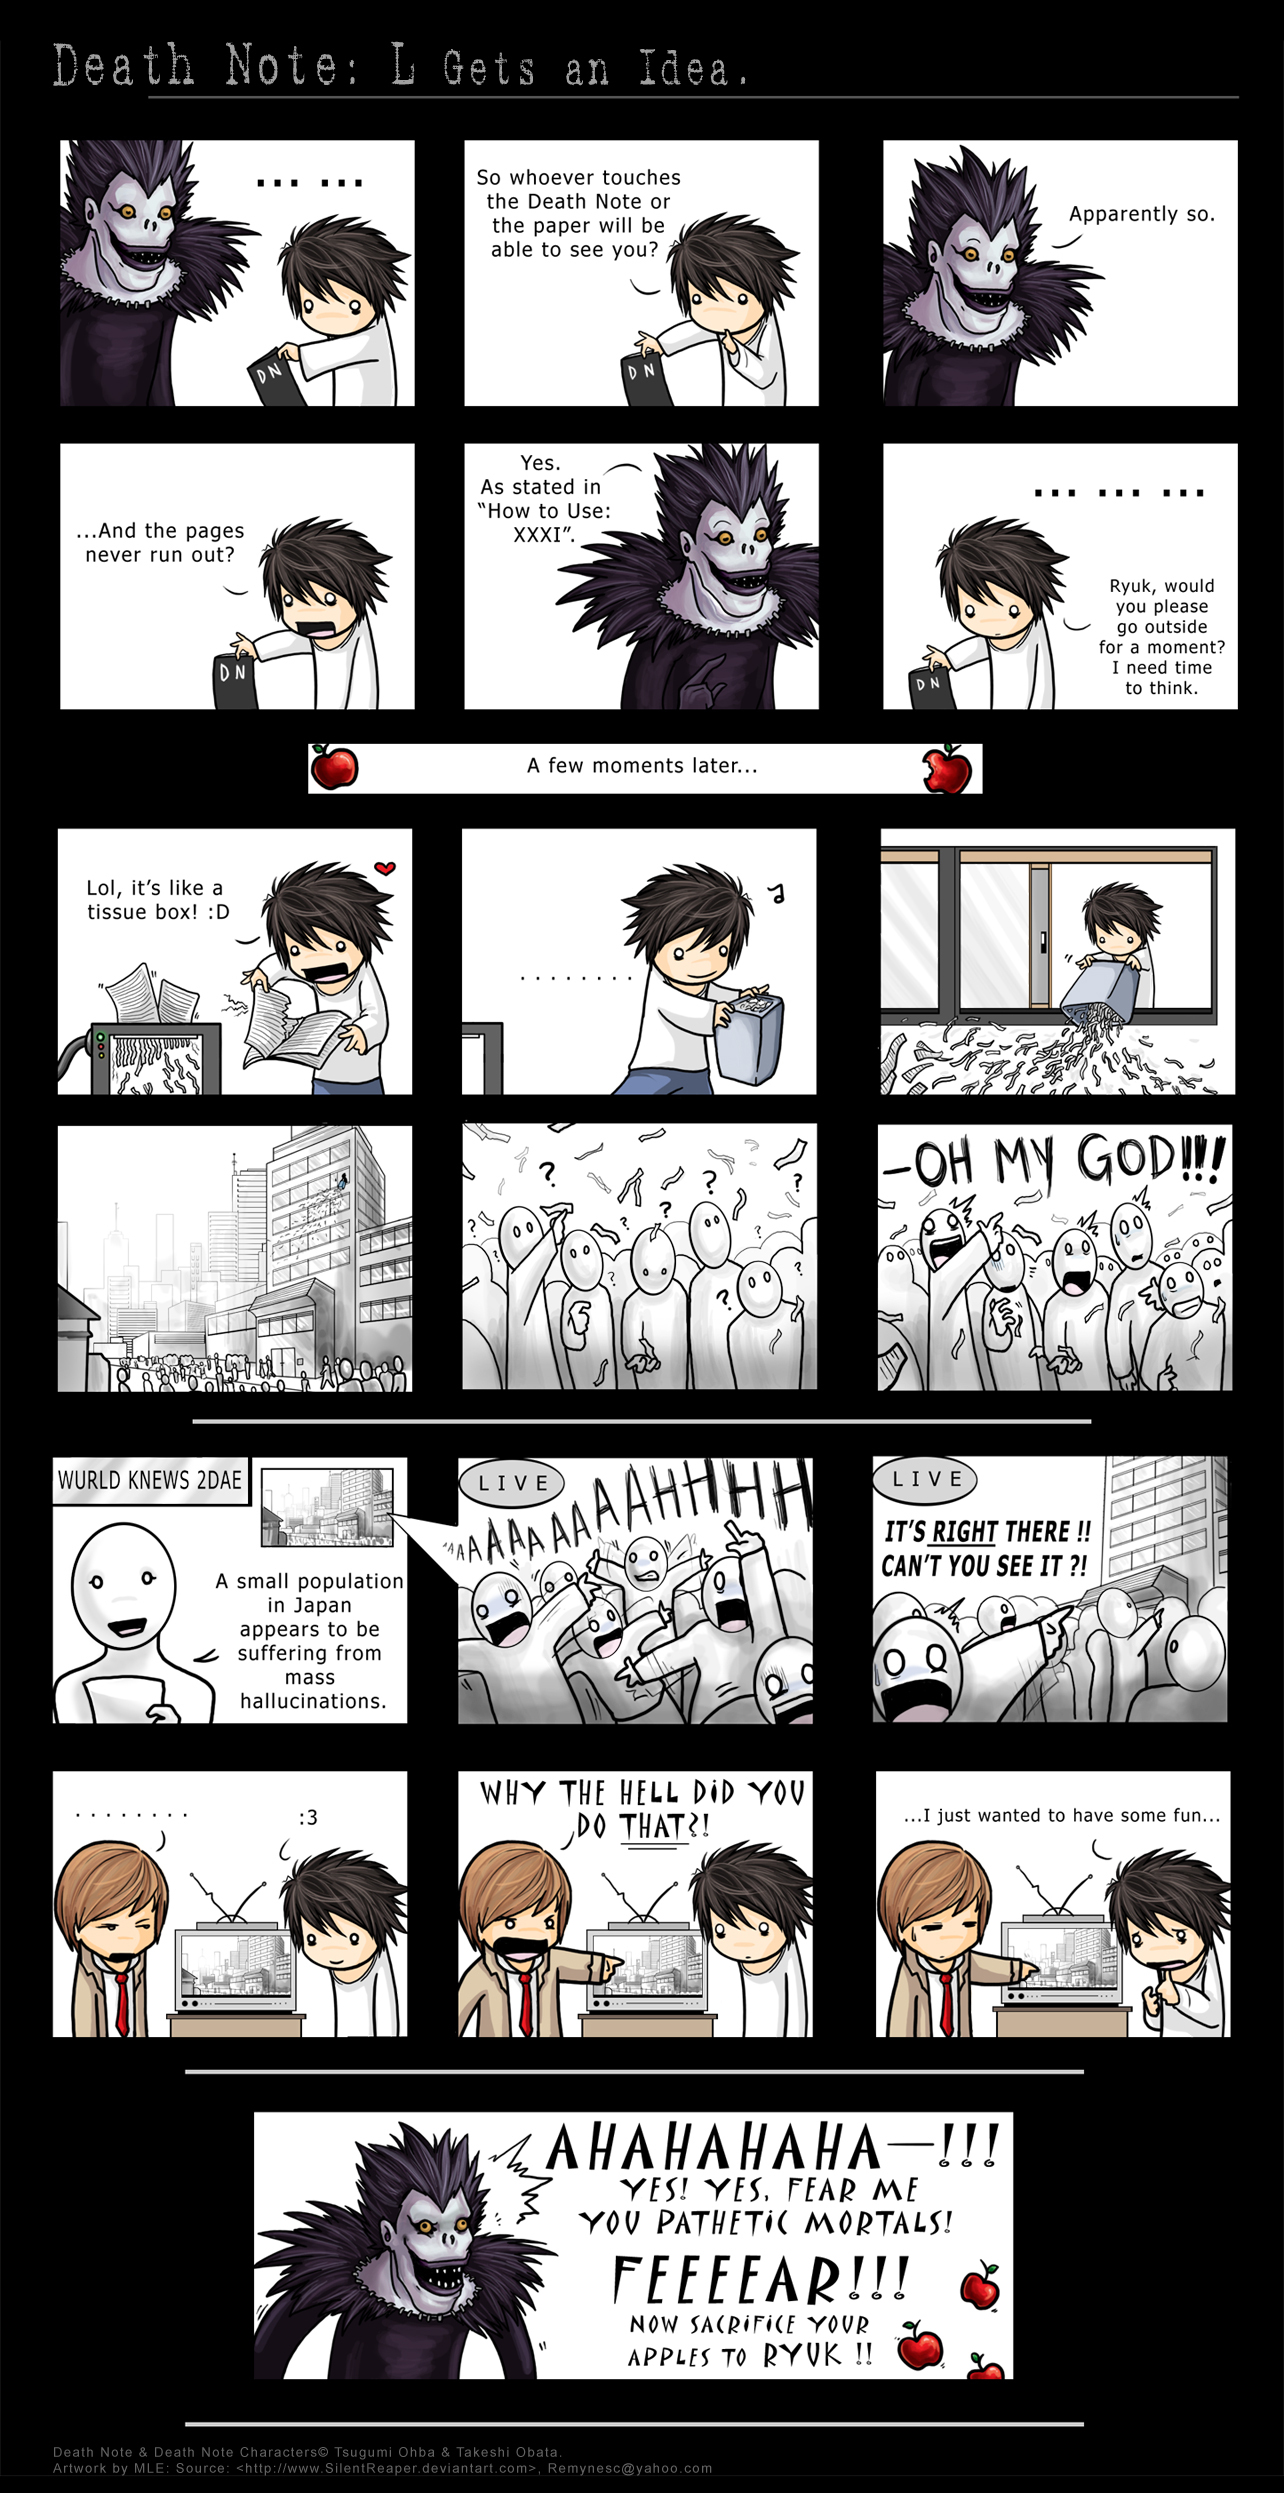 Funniest Death Note Comic? Poll Results - Death Note - Fanpop